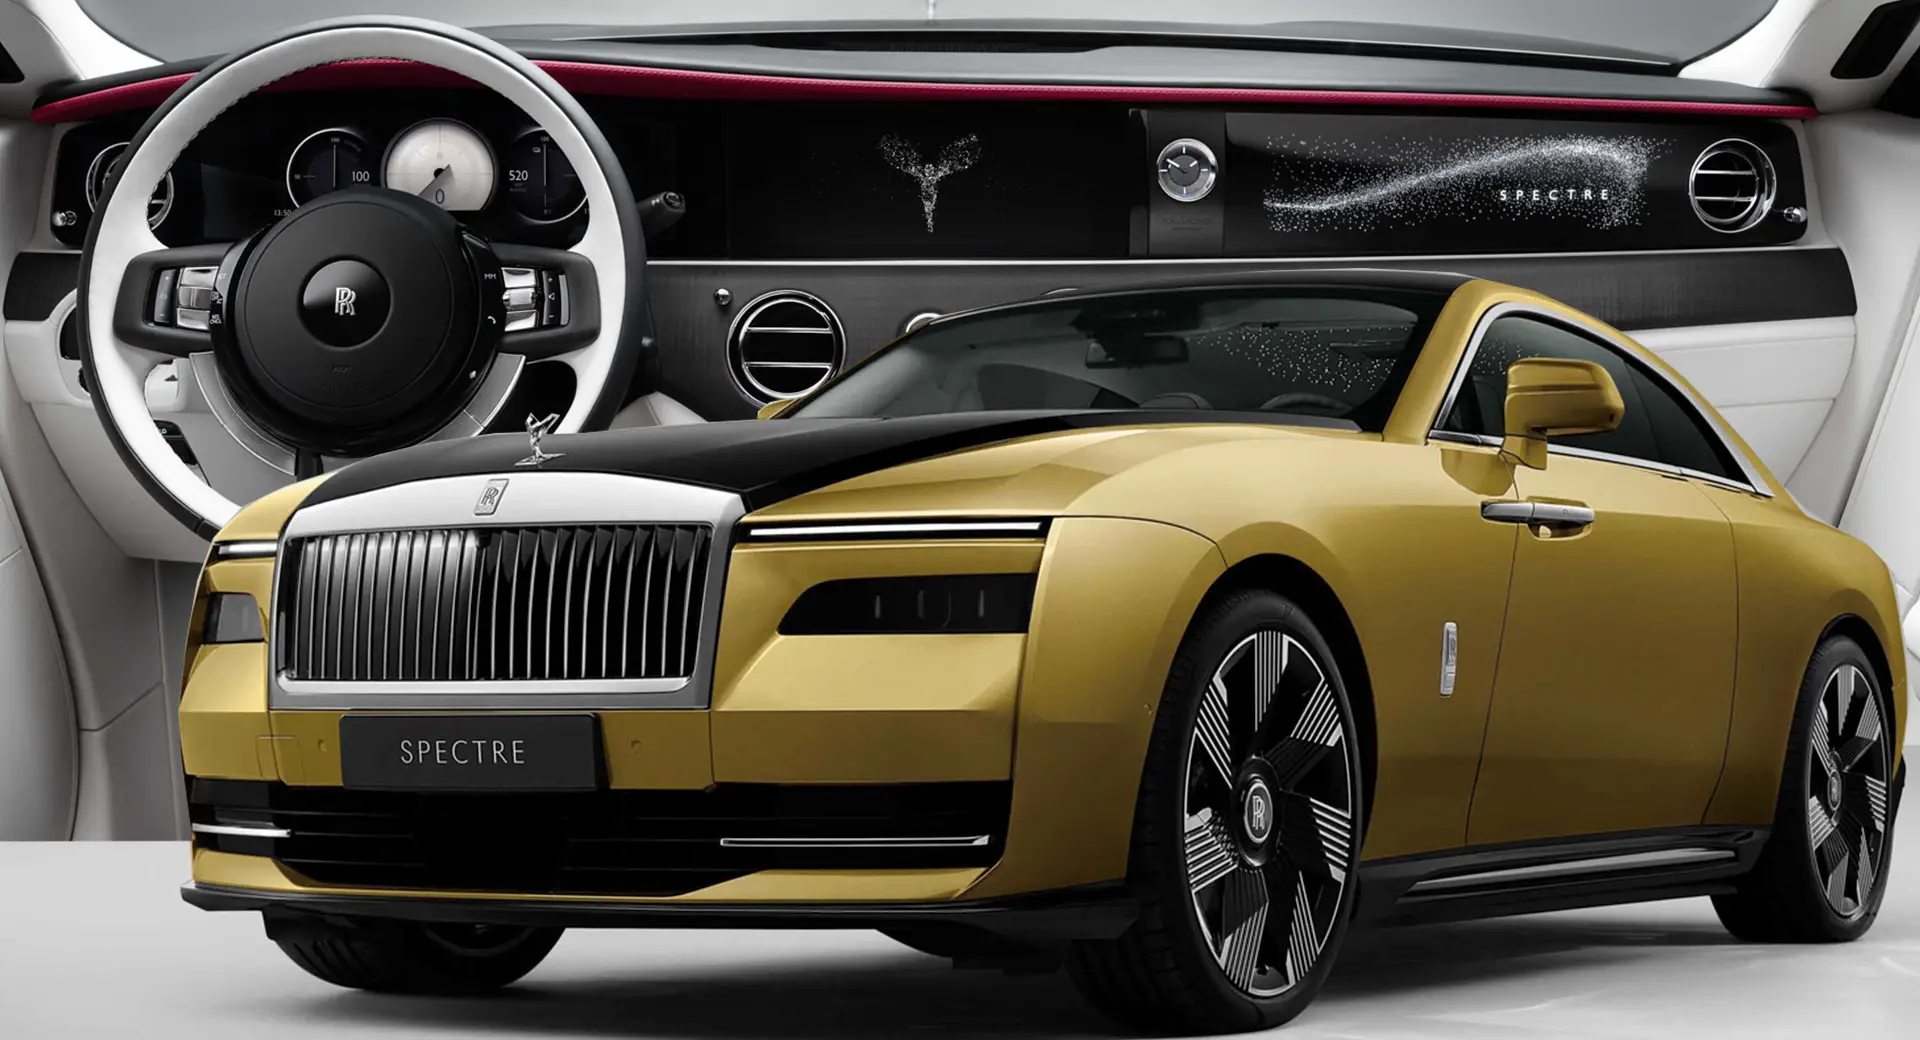 The Future of Luxury Rolls Royce Electric Cars